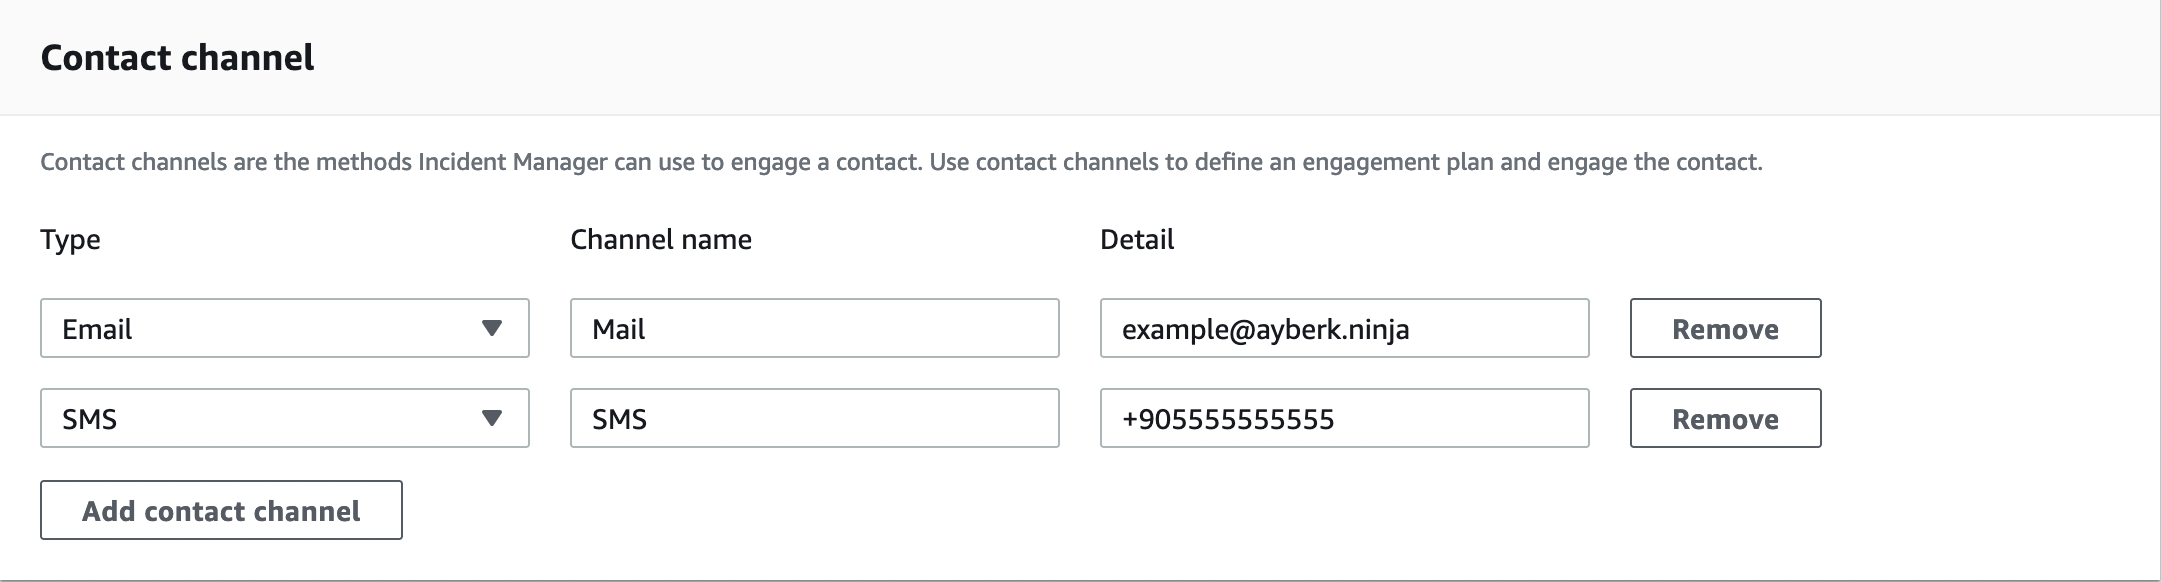 AWS Incident Manager Contact Detail